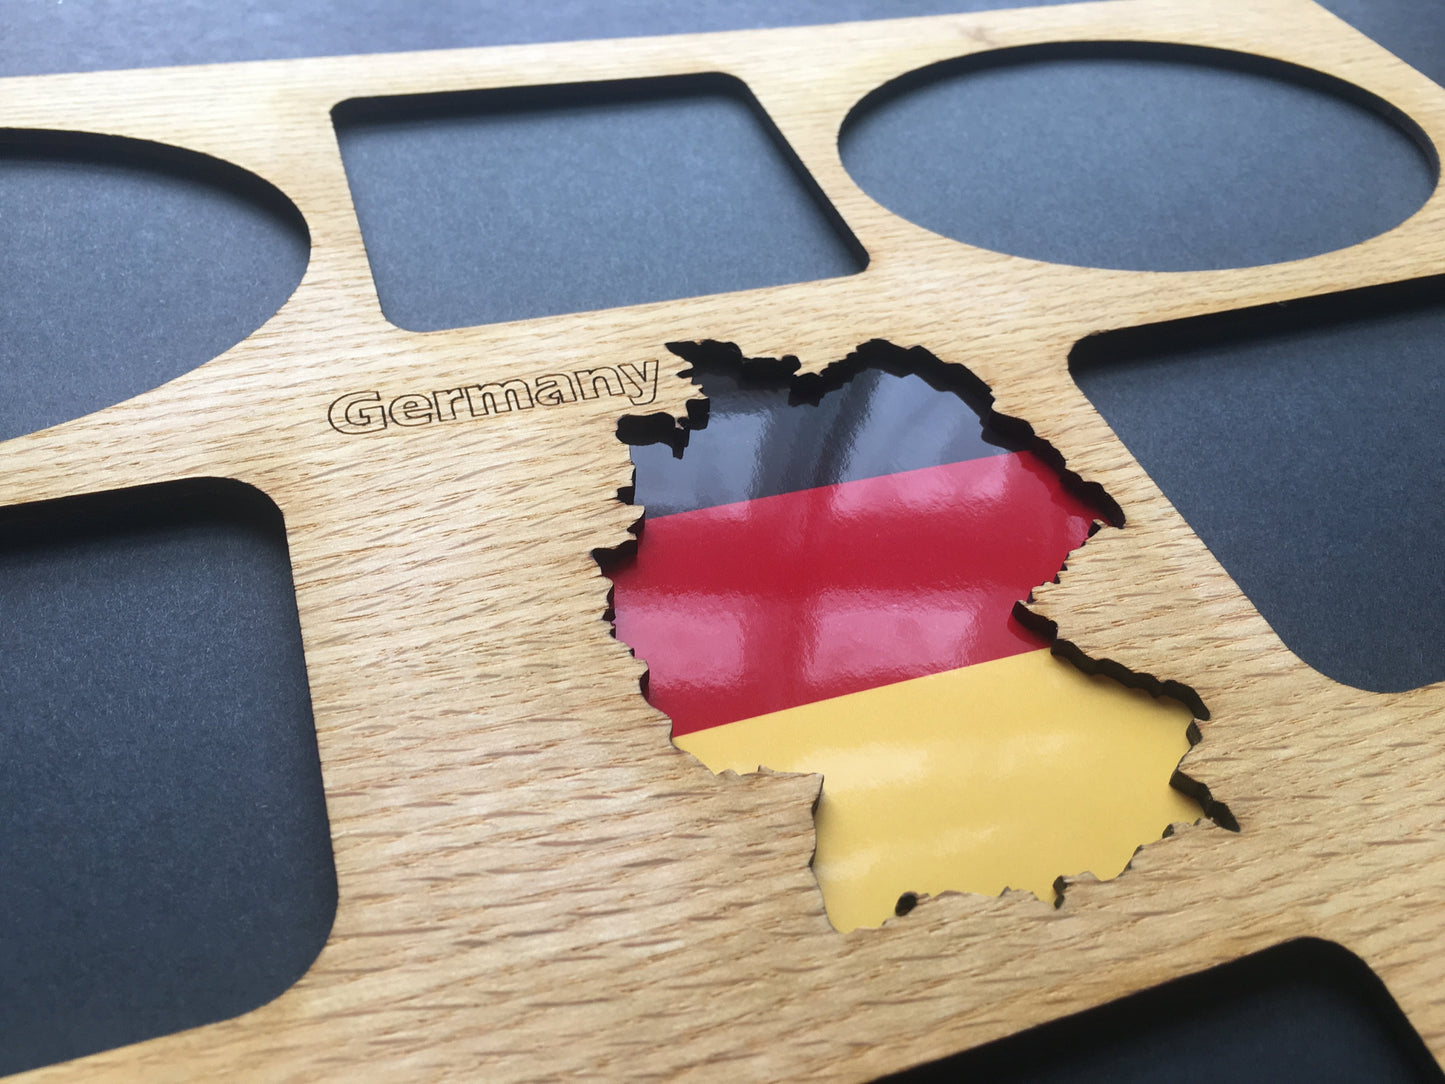 11x14 Germany Picture Frame, Picture Frame, home decor, laser engraved - Legacy Images